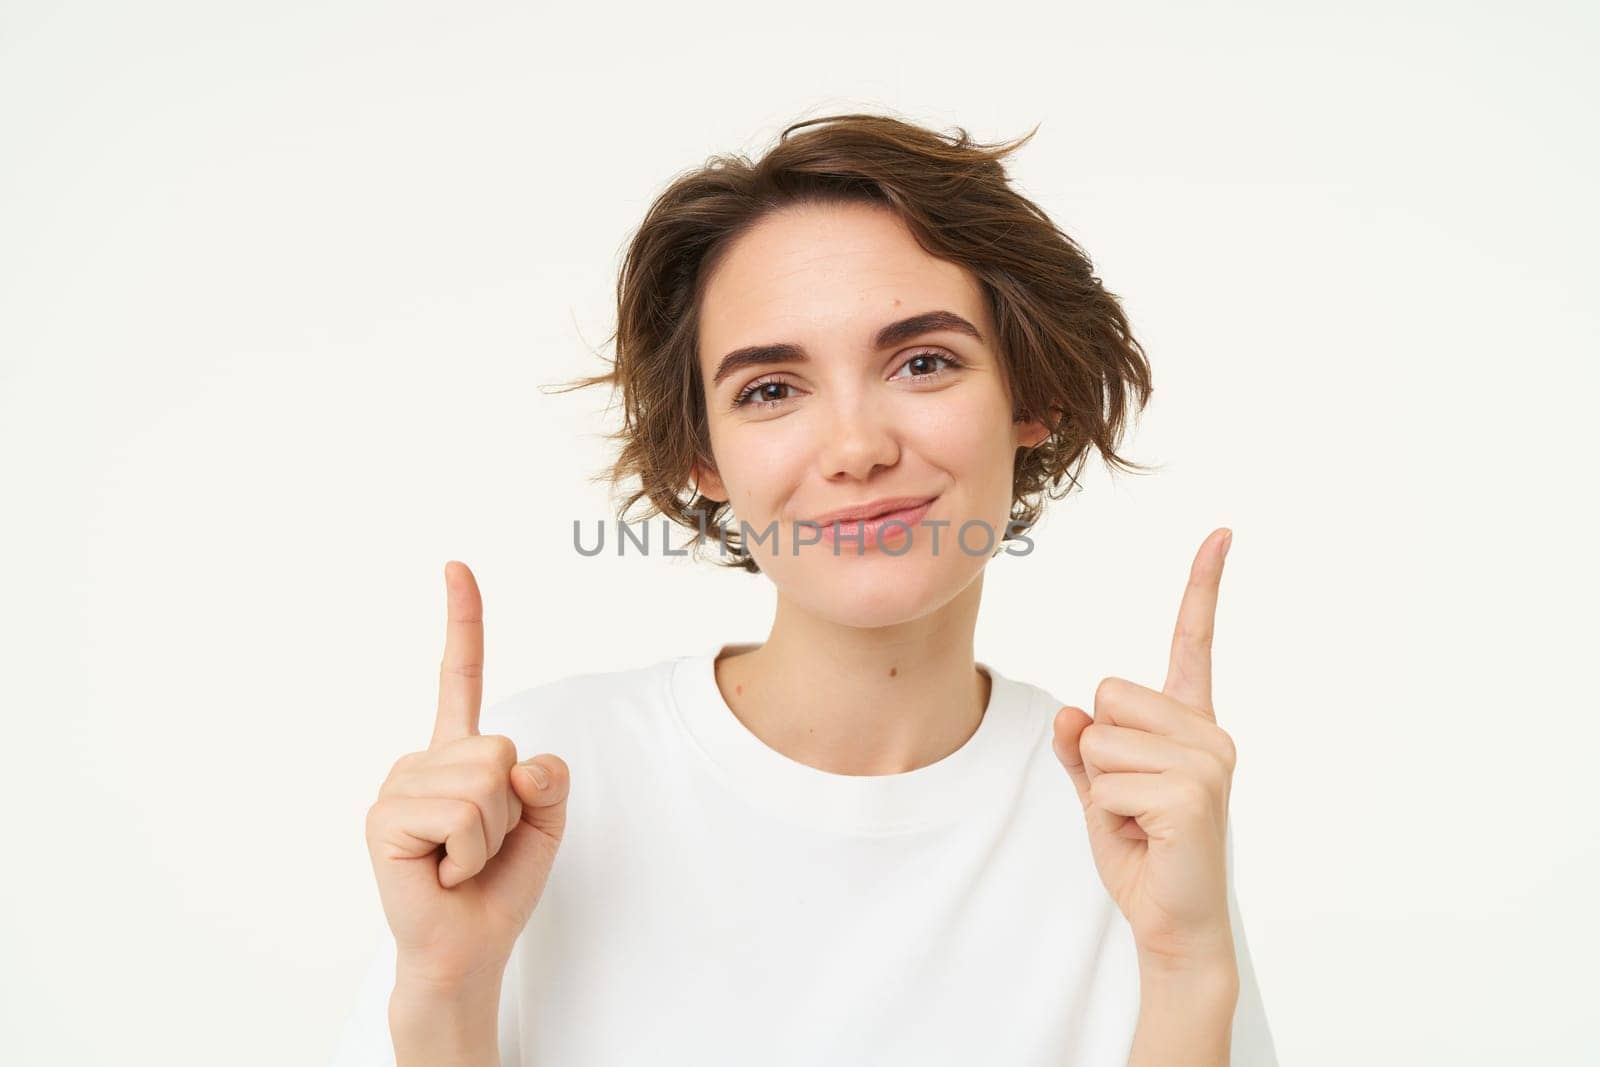 Portrait of cheerful girl with smiling face, pointing fingers up, showing banner or advertisement, look at top gesture, standing against white background.